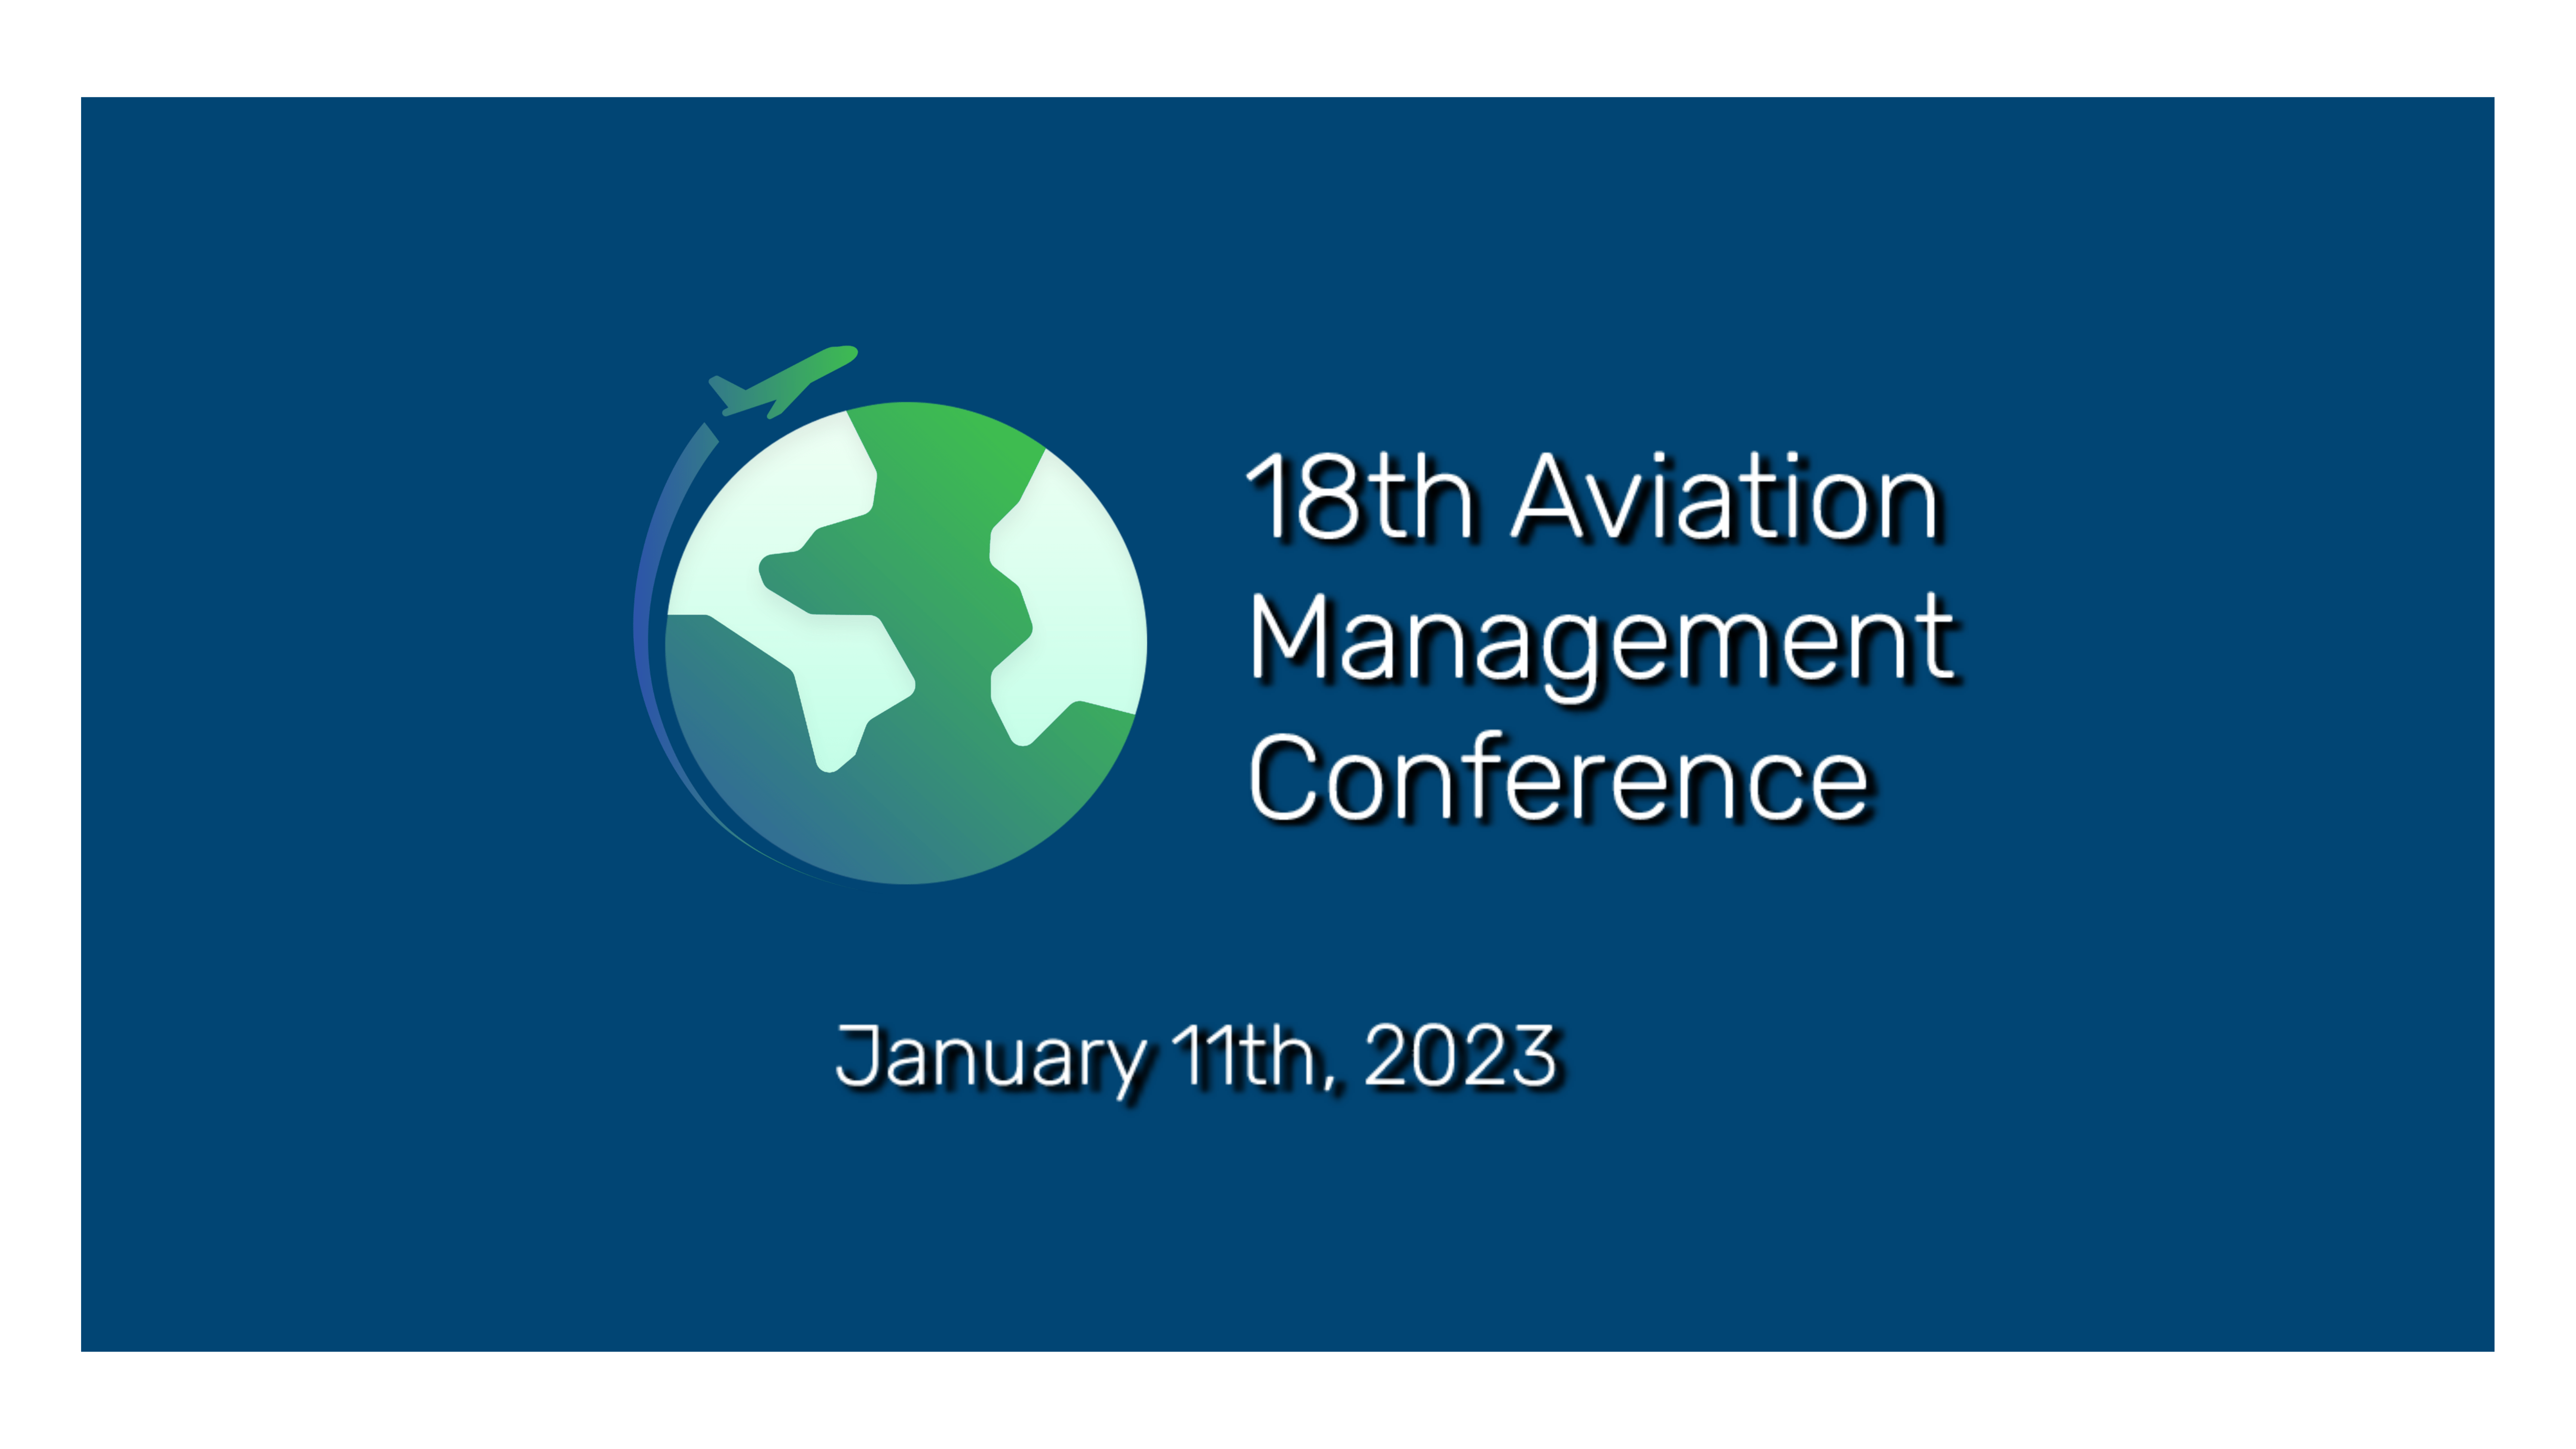 The Journey of Transition - 18th Aviation Management Conference